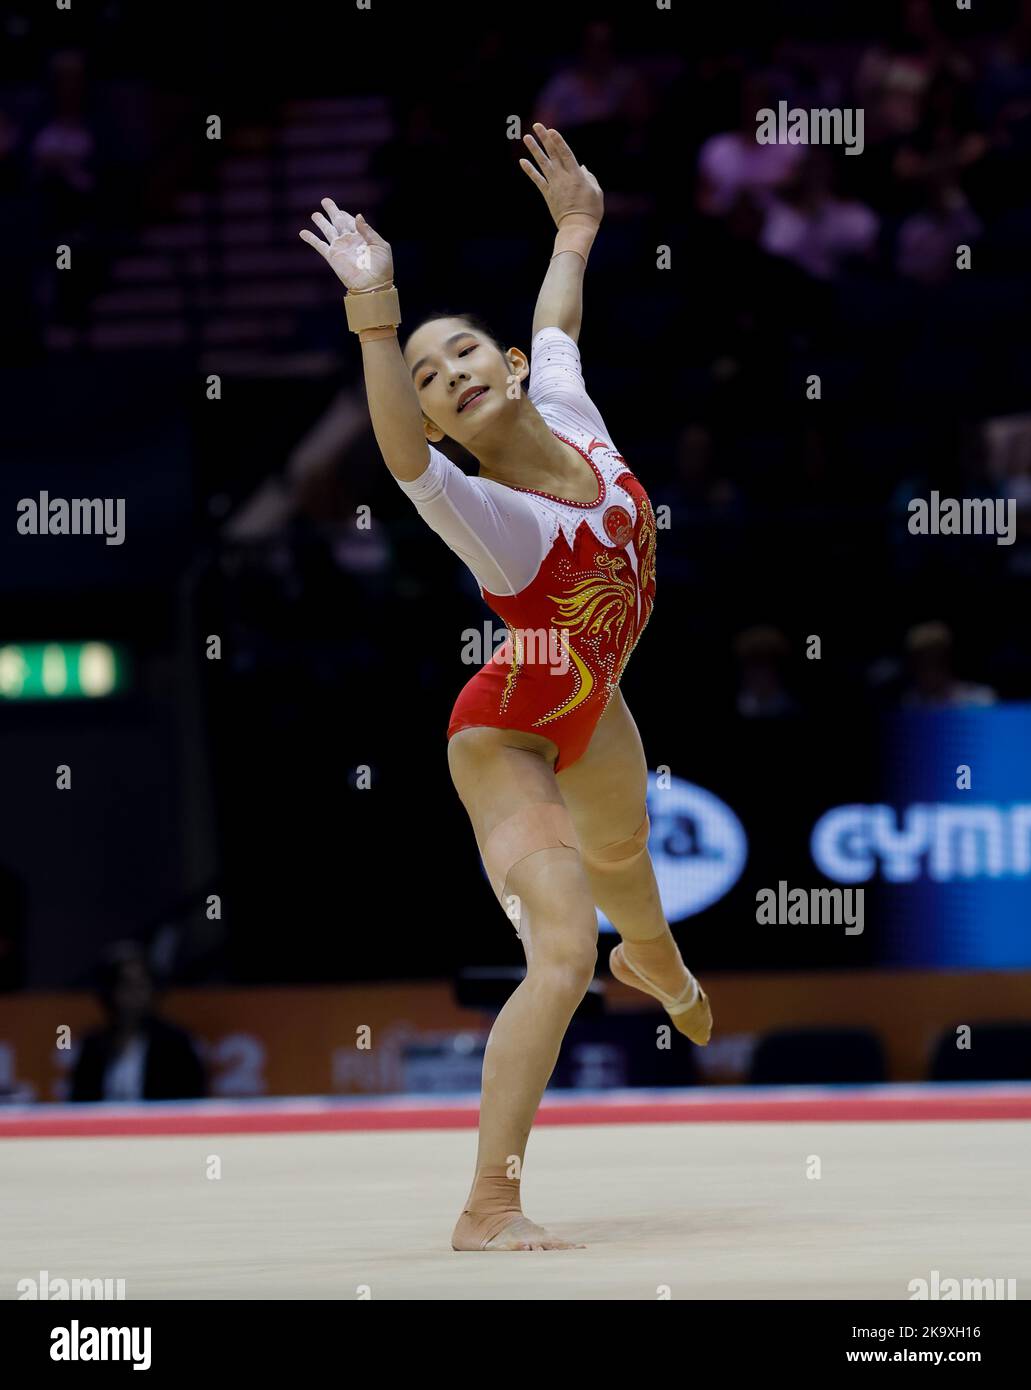 Liverpool, UK. 30th October 2022,  M&amp;S Bank Arena, Liverpool, England; 2022 World Artistic Gymnastics Championships; Women's Qualification Balance Beam - Xijing Tang (CHN) Tokyo 2020 Olympic balance beam silver medalist Credit: Action Plus Sports Images/Alamy Live News Stock Photo